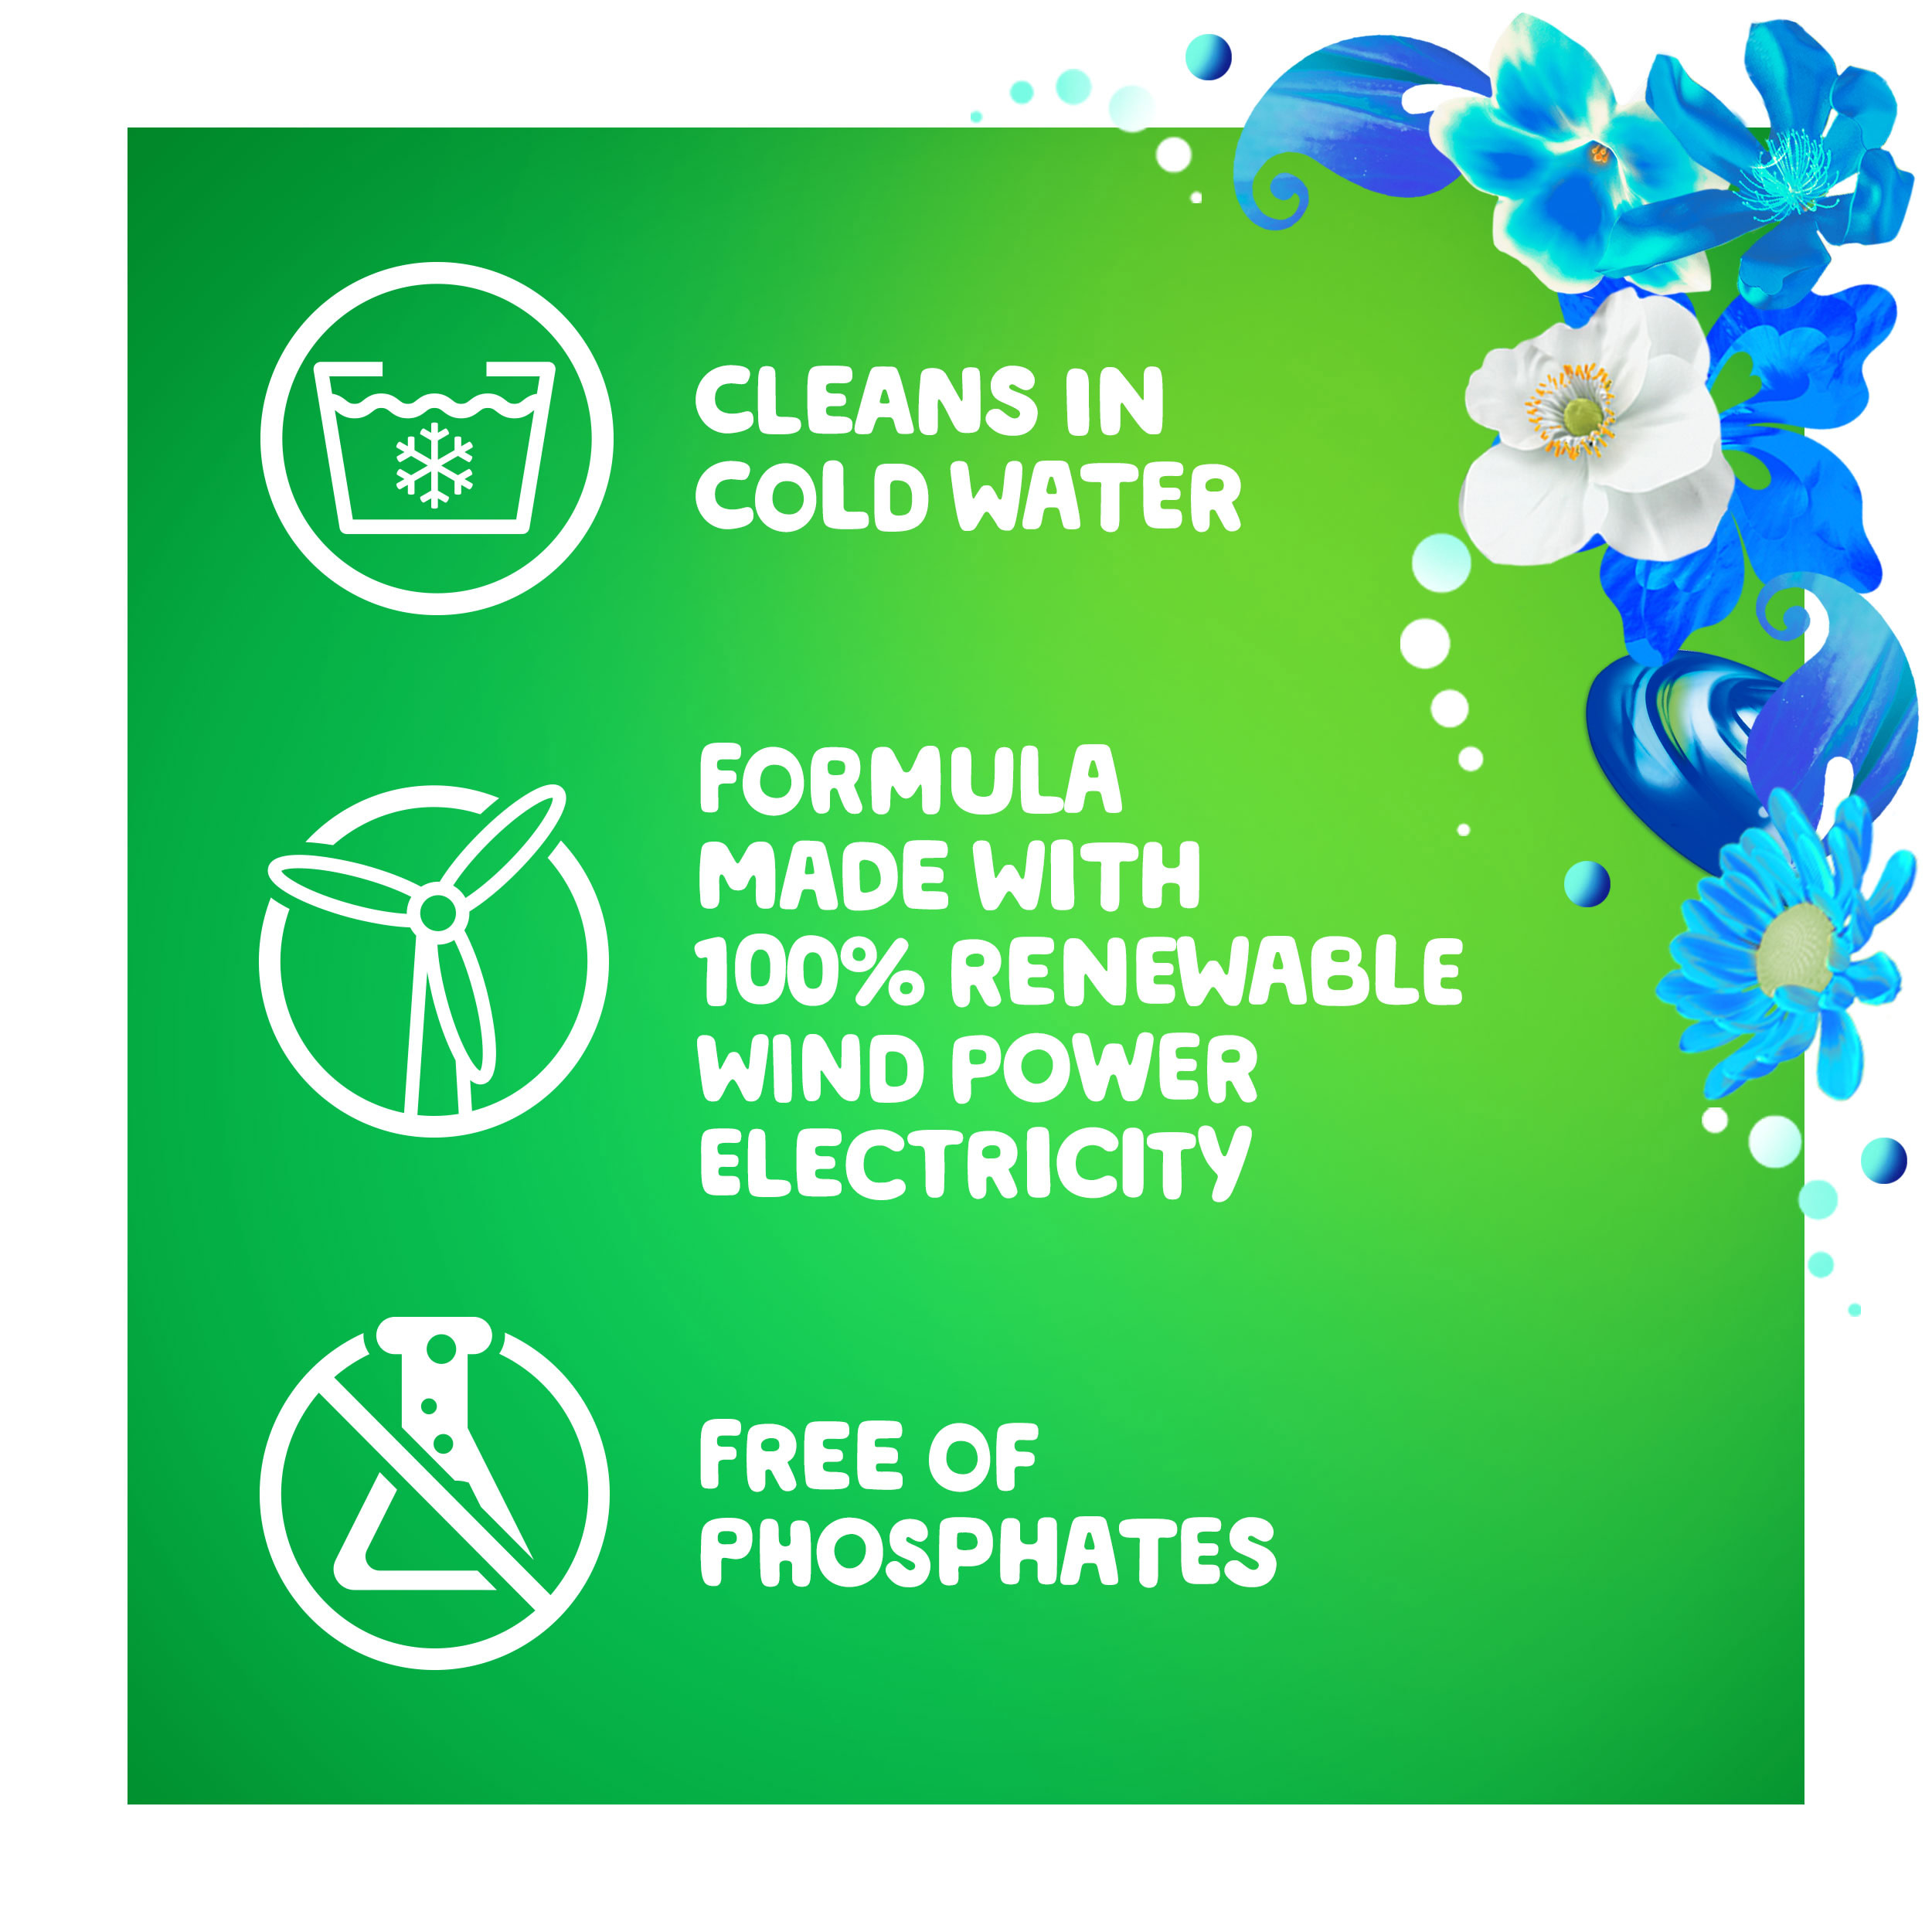 Gain Blissful Breeze Liquid Laundry Detergent cleans in cold water, the formula is made with 100% reneweable wind power electricity and it is free of phosphates